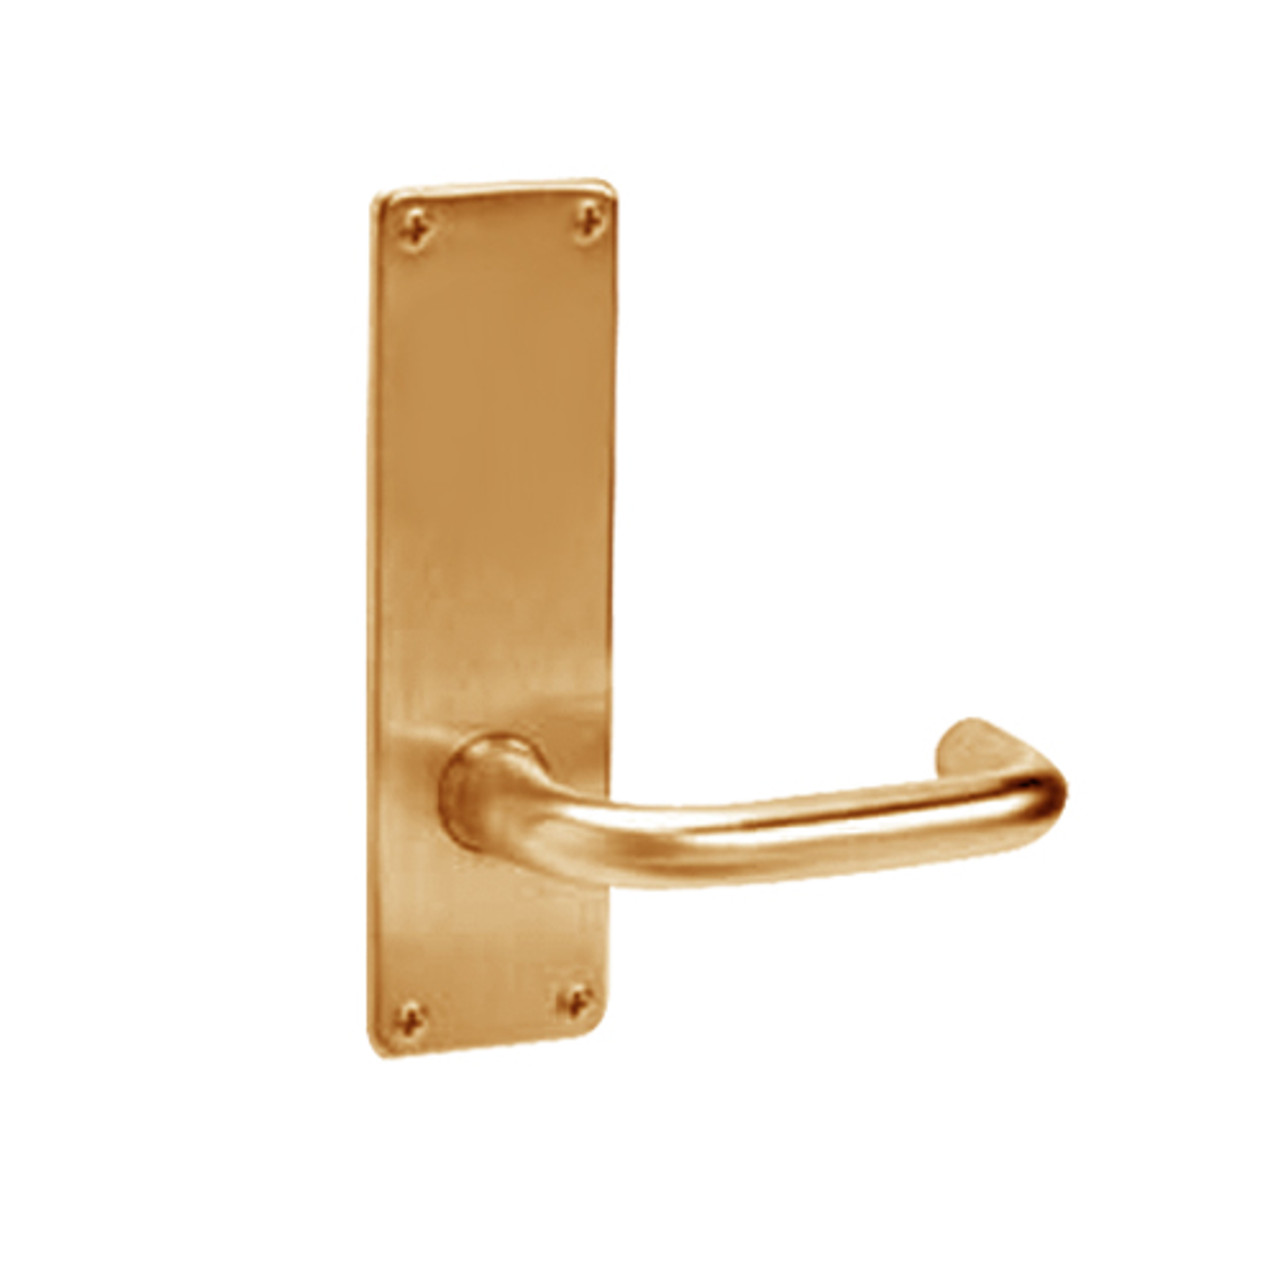 ML2020-LSN-612 Corbin Russwin ML2000 Series Mortise Privacy Locksets with Lustra Lever in Satin Bronze